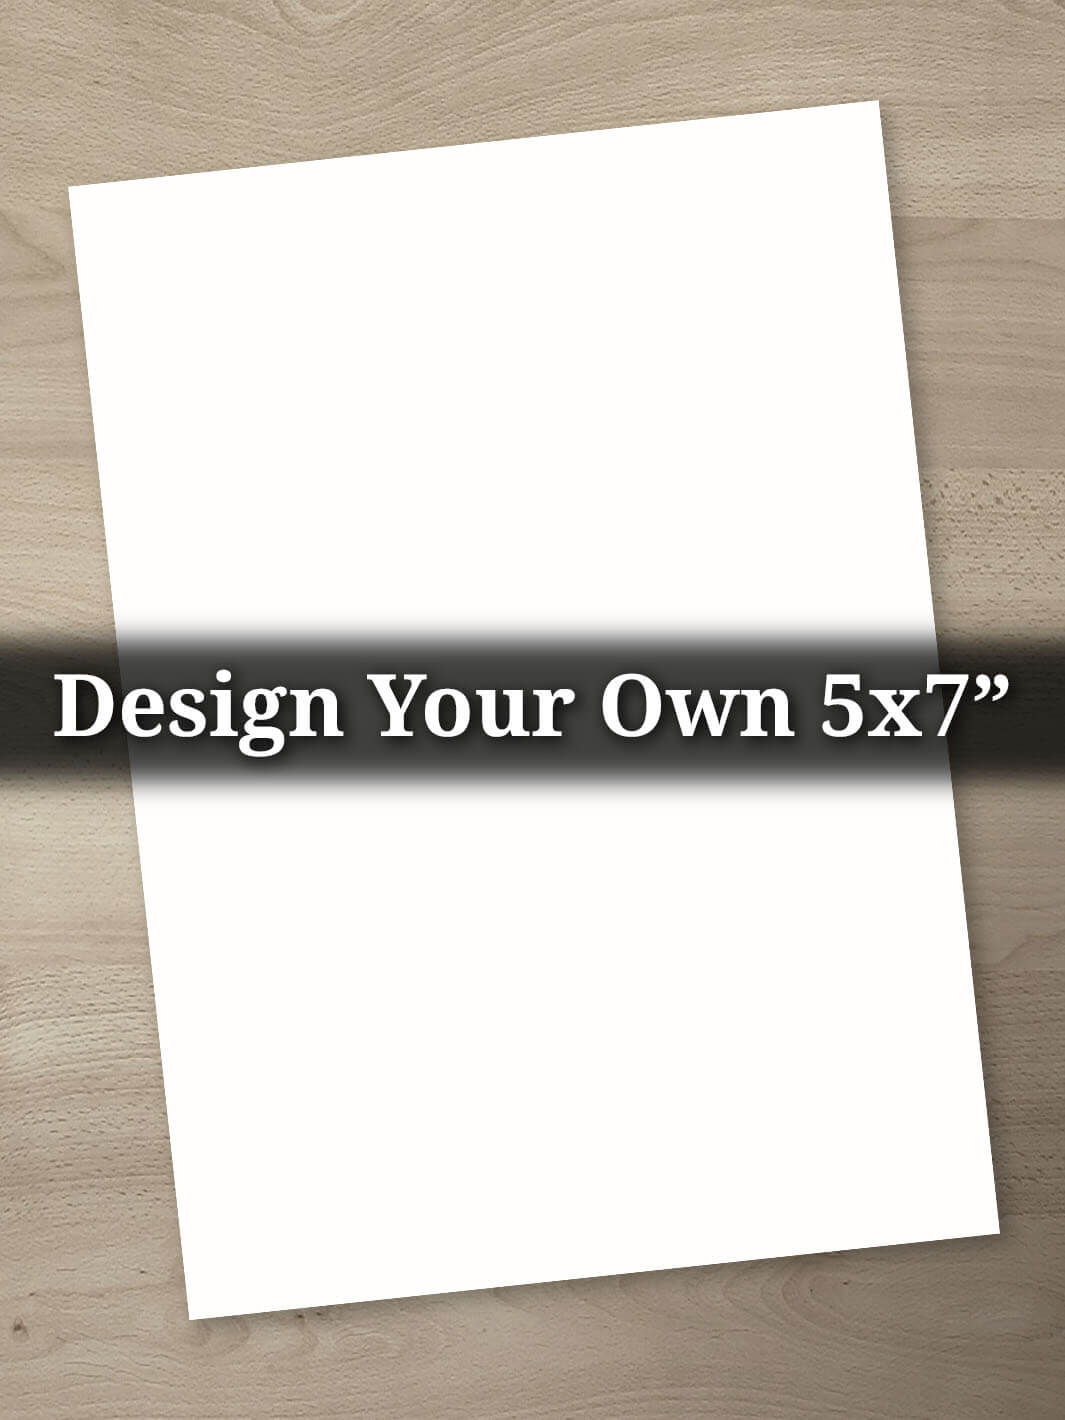 5 inches by 7 inches blank design your own template